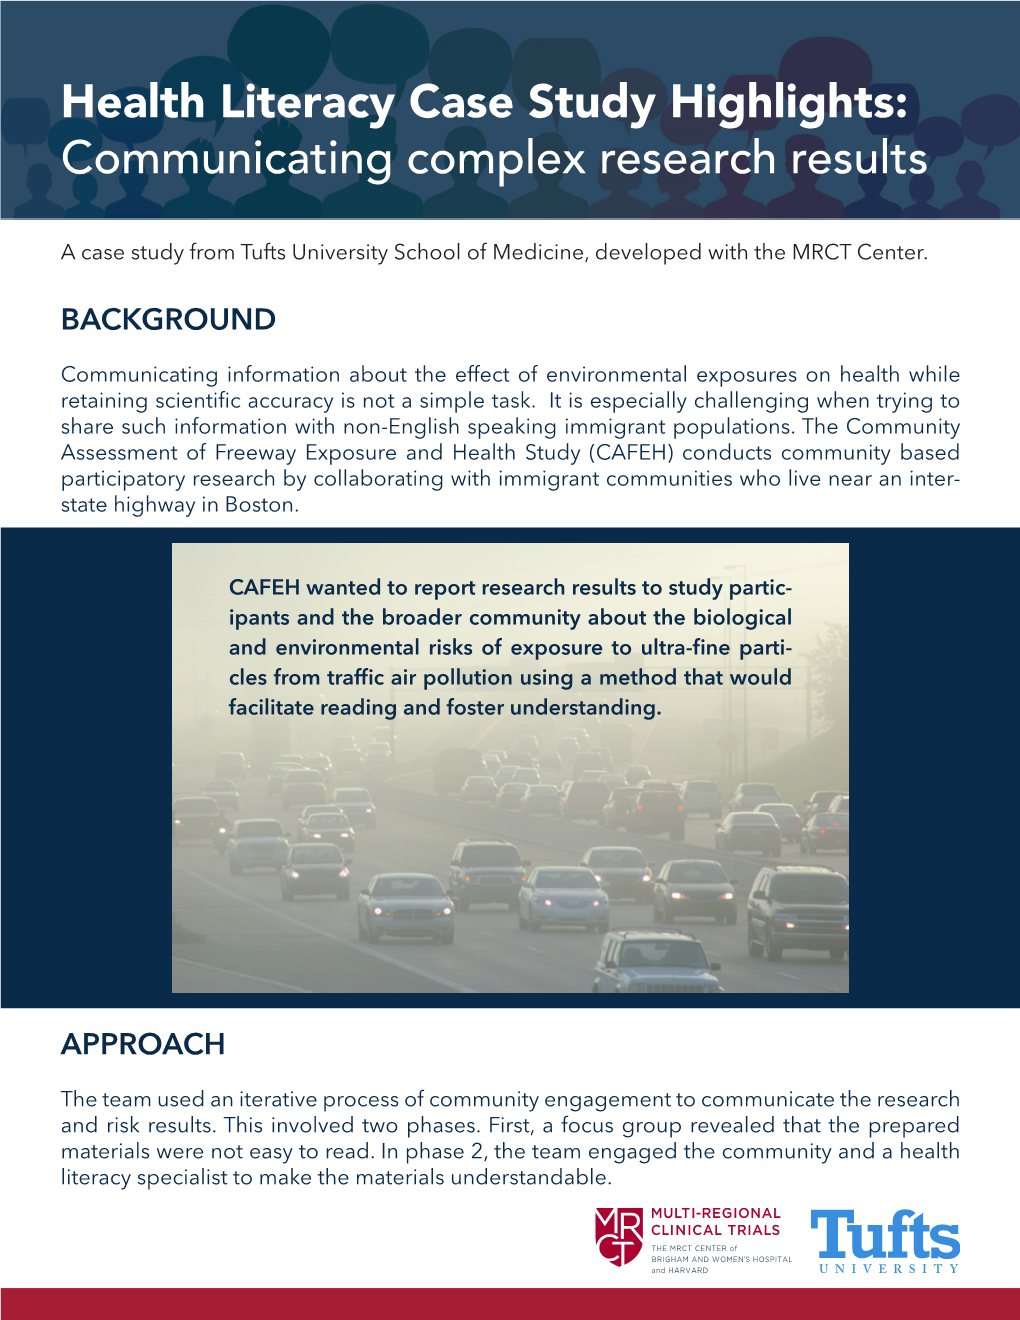 Health Literacy Case Study Highlights: Communicating Complex Research Results